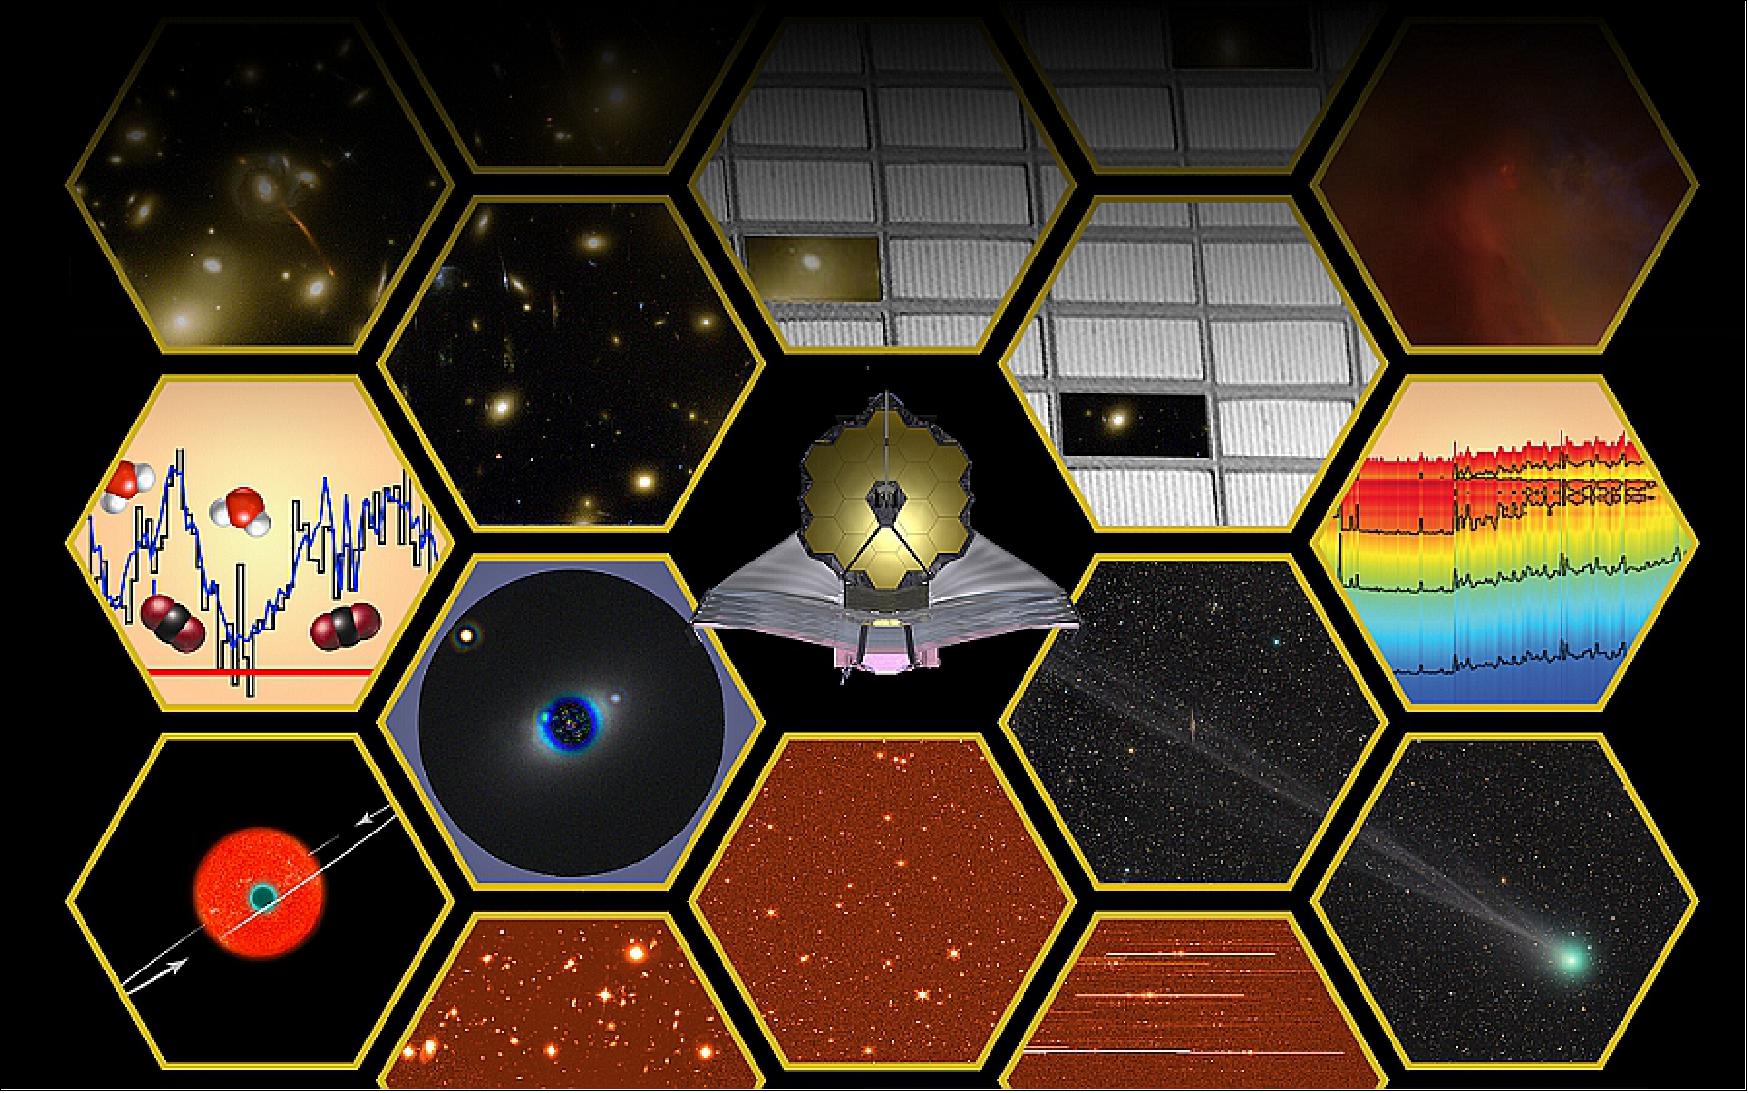 Figure 51: Once deployed, the JWST will conduct a variety of science missions aimed at improving our understanding of the Universe (image credit: NASA/STScI)